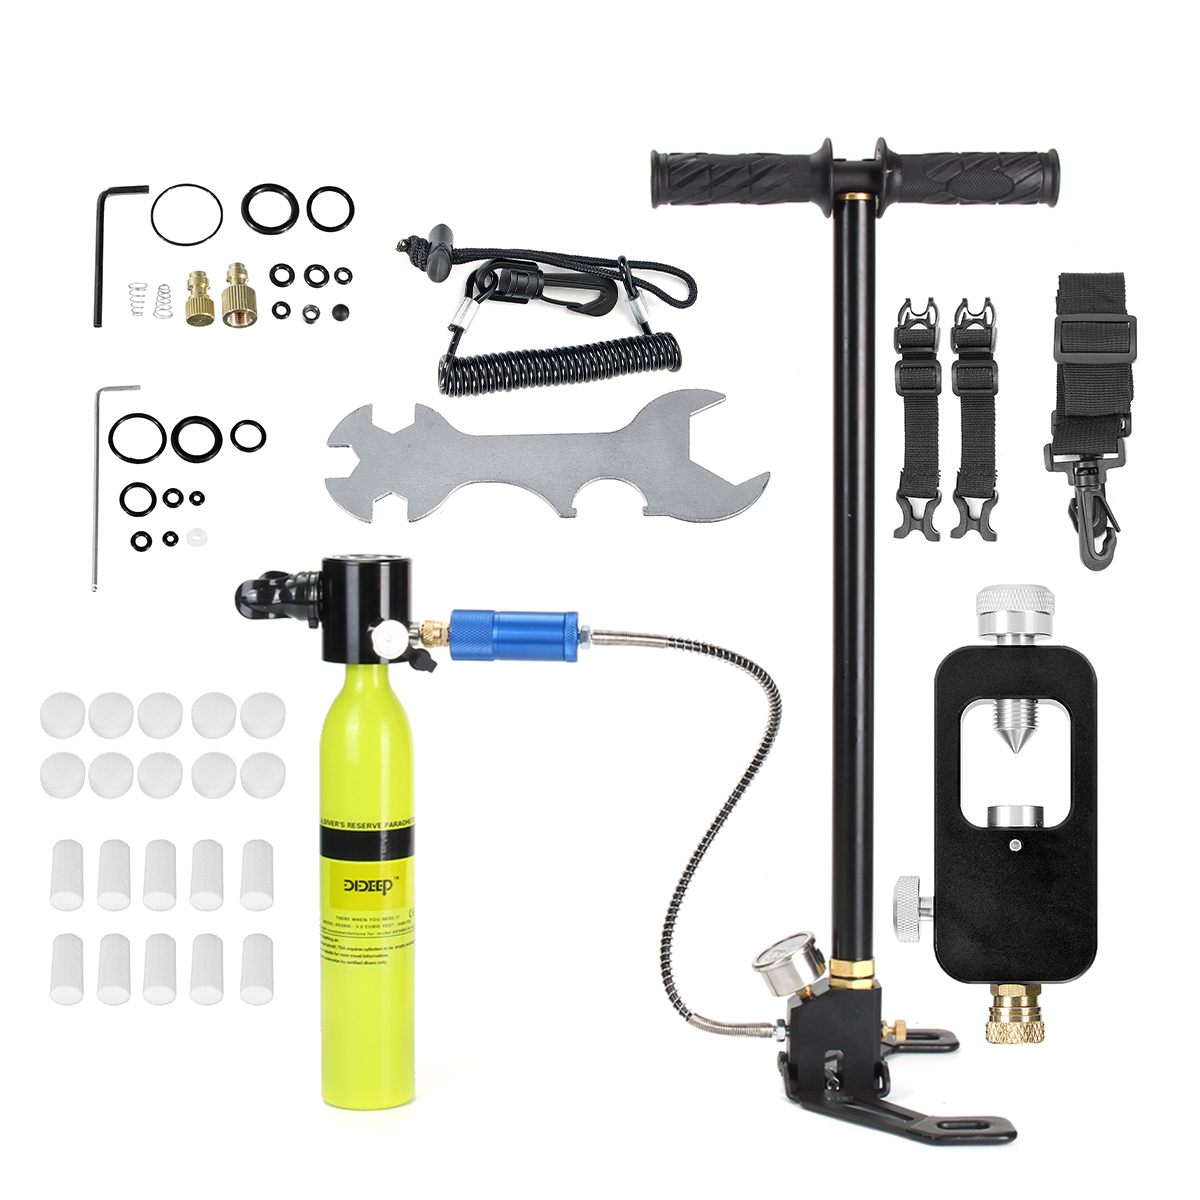 

0.5L Scuba Oxygen Tank Portable Diving Reserve Air Tank Set Hand Pump Oxygen Cylinder Mini Operated Pump with Pump and R